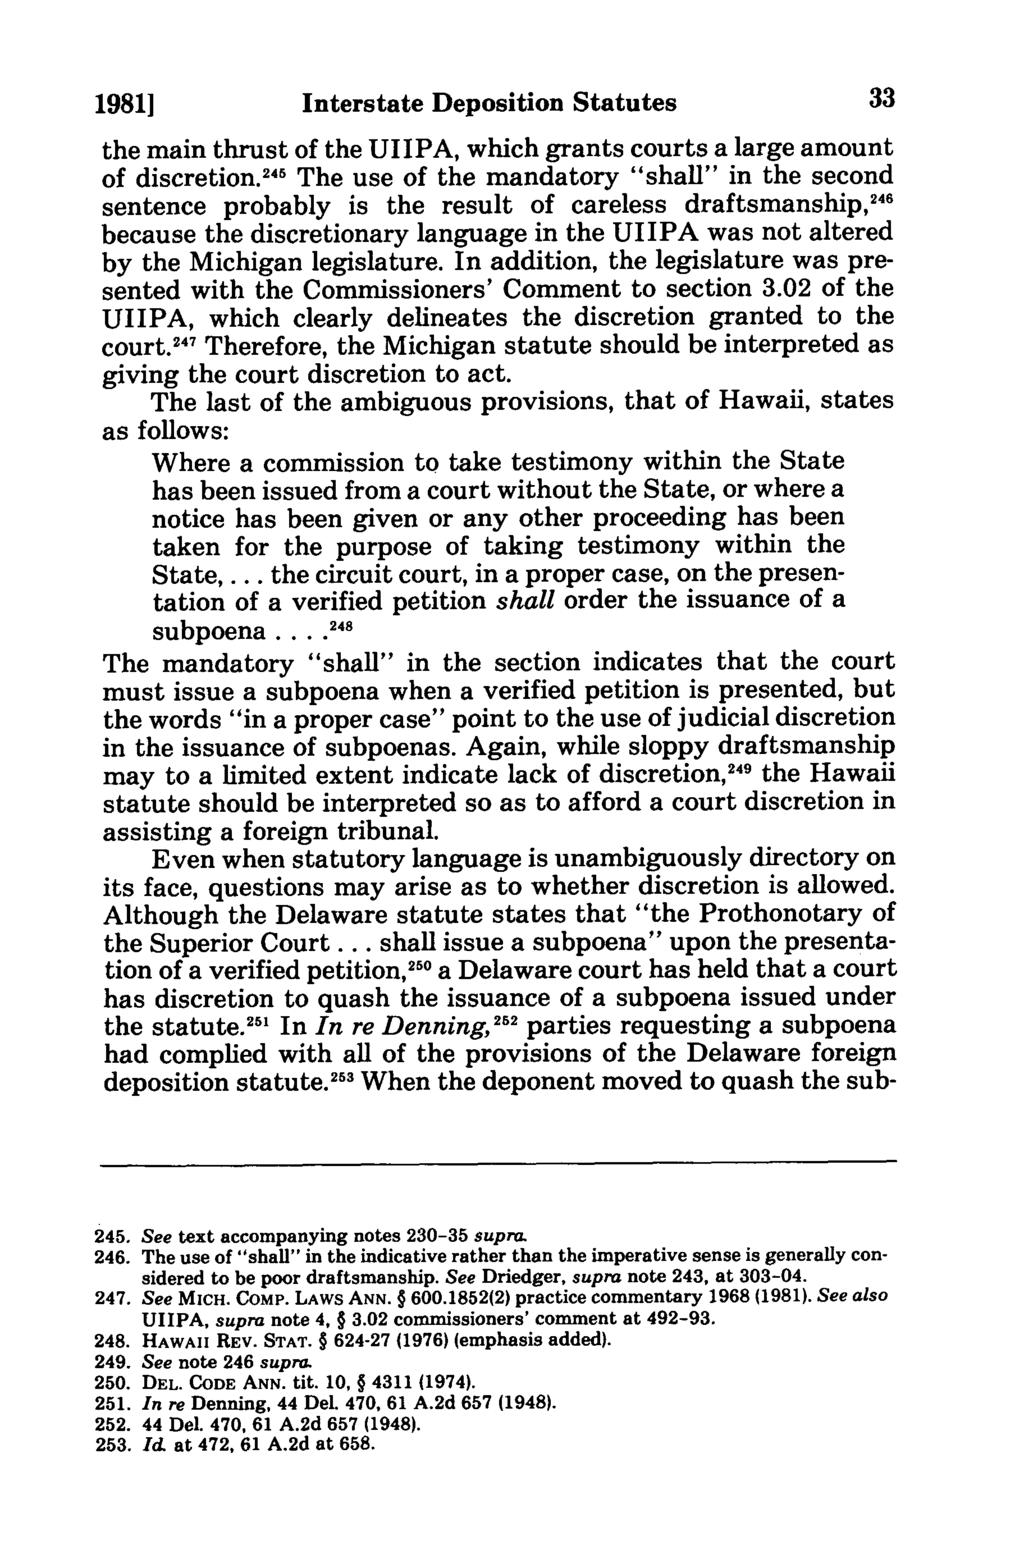 19811 Interstate Deposition Statutes the main thrust of the UIIPA, which grants courts a large amount of discretion.